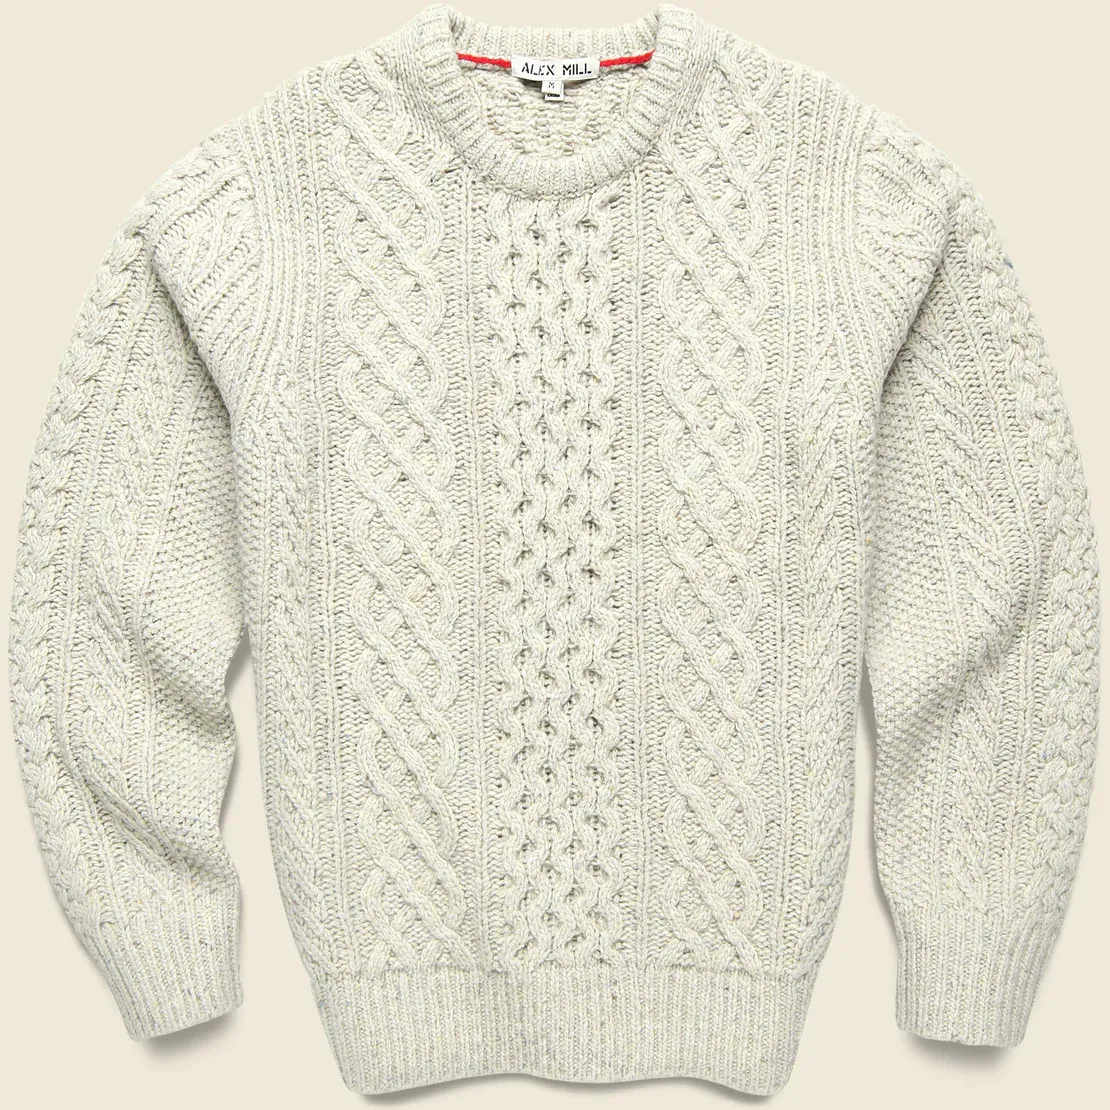 The Chunky Sweater: A Knitted Cathedral of Cozy, Woven from Stardust and  Sheep Dreams